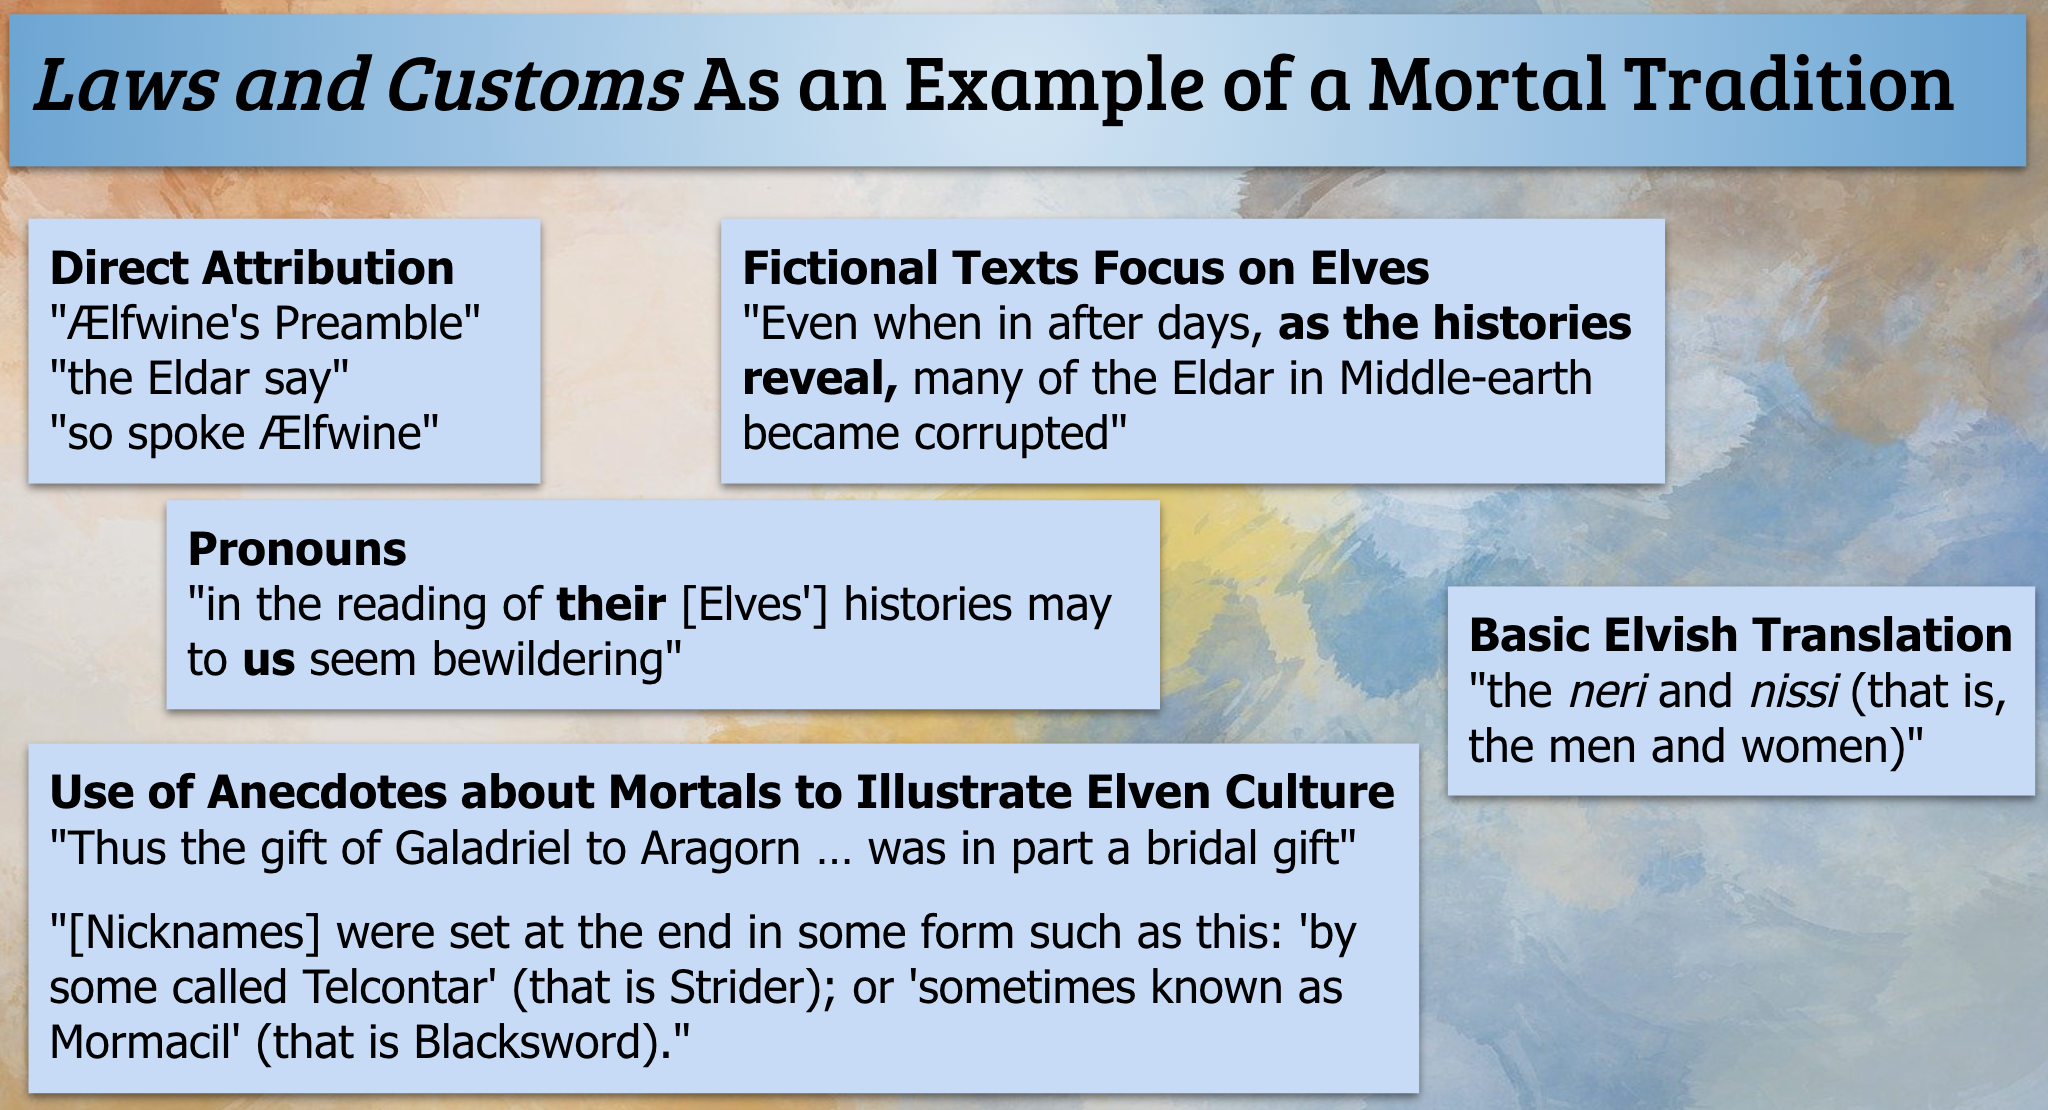 Direct Attribution: 'Ælfwine's Preamble,' 'the Eldar say,' and 'so spoke Ælfwine.' Fictional Texts Focus on Elves: 'Even when in after days, as the histories reveal, many of the Eldar in Middle-earth became corrupted.' Pronouns: 'in the reading of their [Elves'] histories may to us seem bewildering.' Basic Elvish Translations: 'the neri and nissi (that is, the men and women).' Use of Anecdotes about Mortals to Illustrate Elven Culture: 'Thus the gift of Galadriel to Aragorn … was in part a bridal gift.' '[Nicknames] were set at the end in some form such as this: 'by some called Telcontar' (that is Strider); or 'sometimes known as Mormacil' (that is Blacksword).'